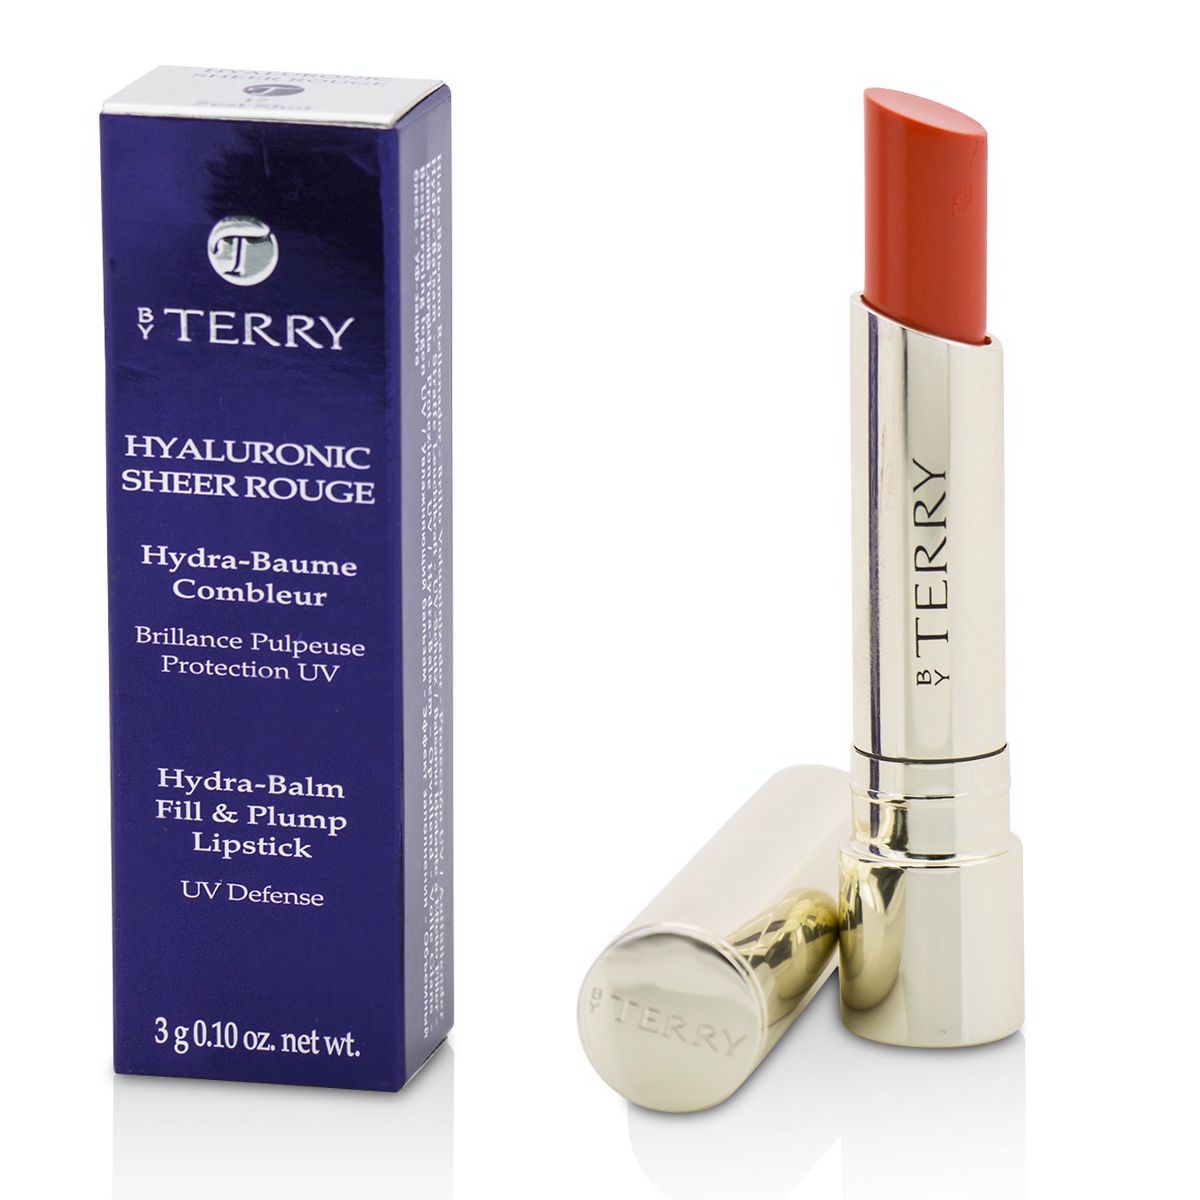 Hyaluronic Sheer Rouge Hydra Balm Fill  Plump Lipstick (UV Defense) - # 17 Zest Shot By Terry Image